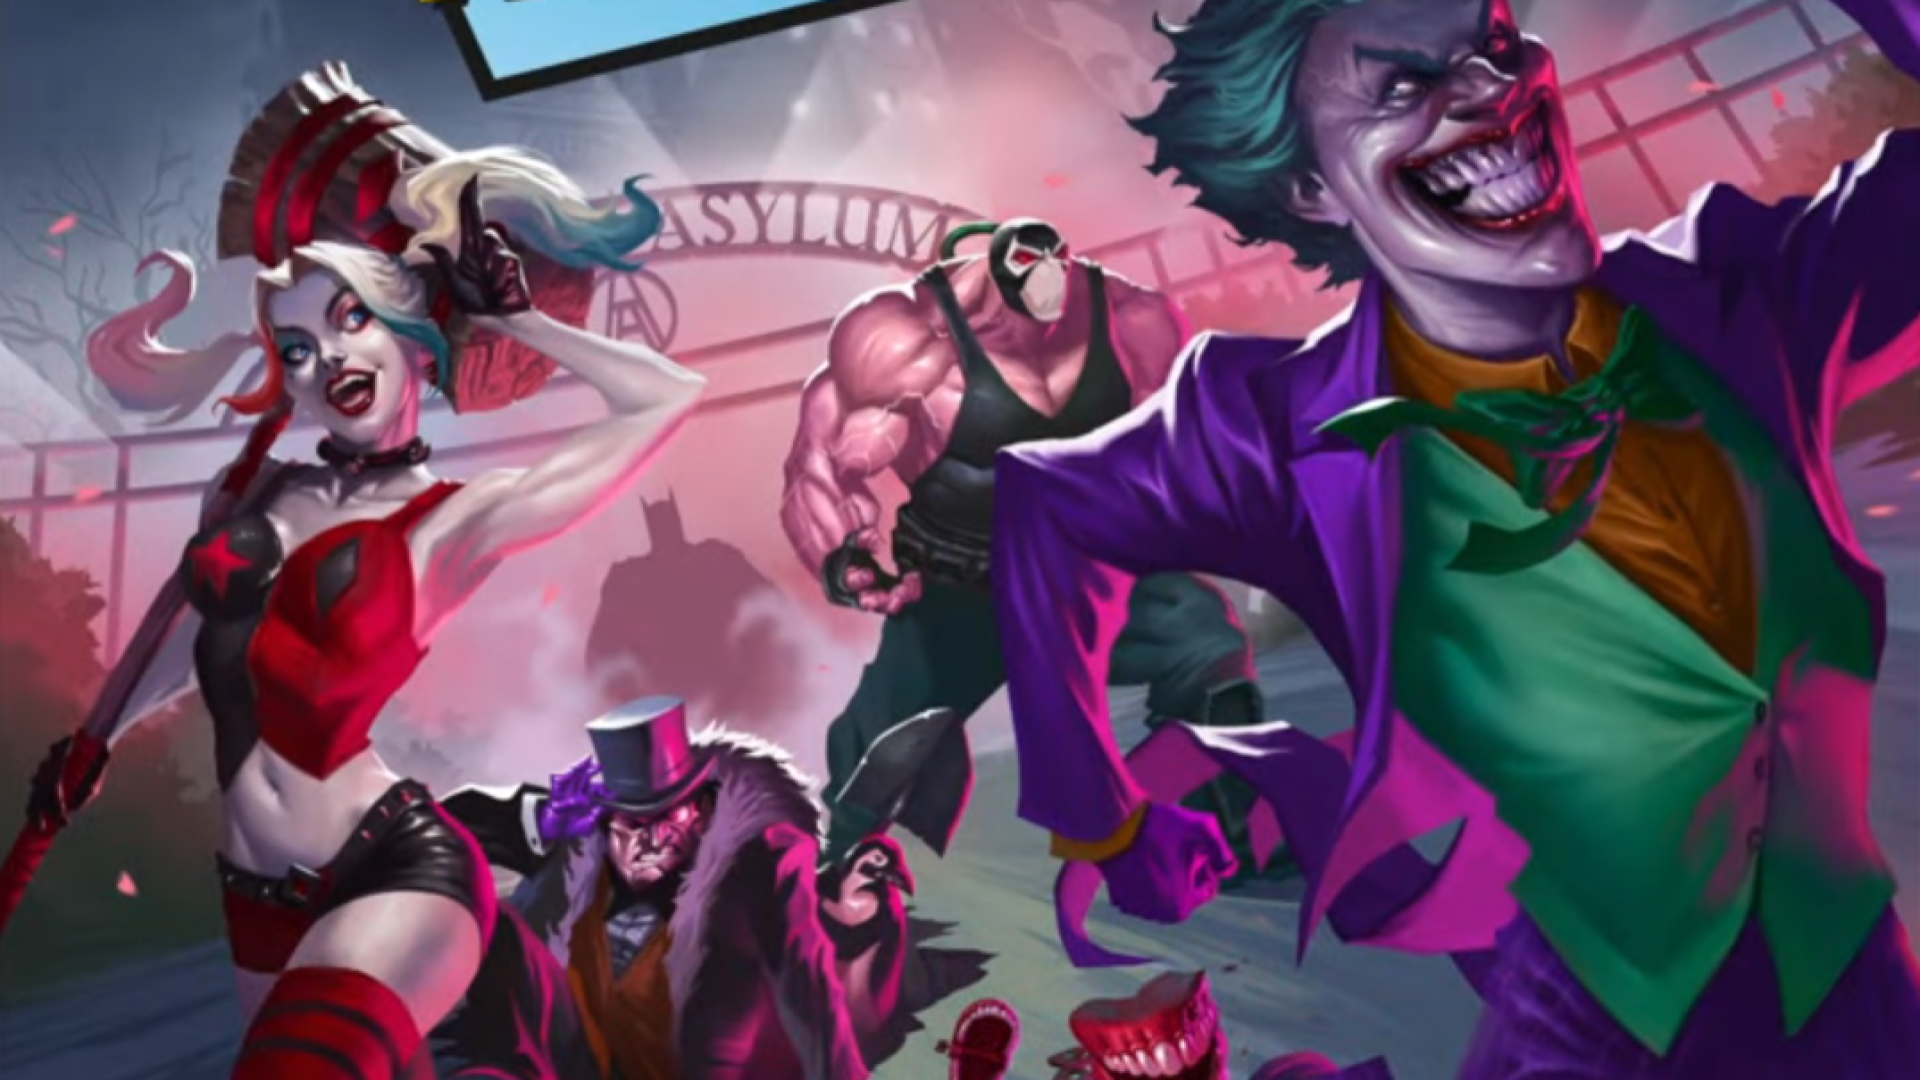 Image for Batman: Escape from Arkham Asylum casts players as the Rogues’ Gallery in a “semi-cooperative” board game